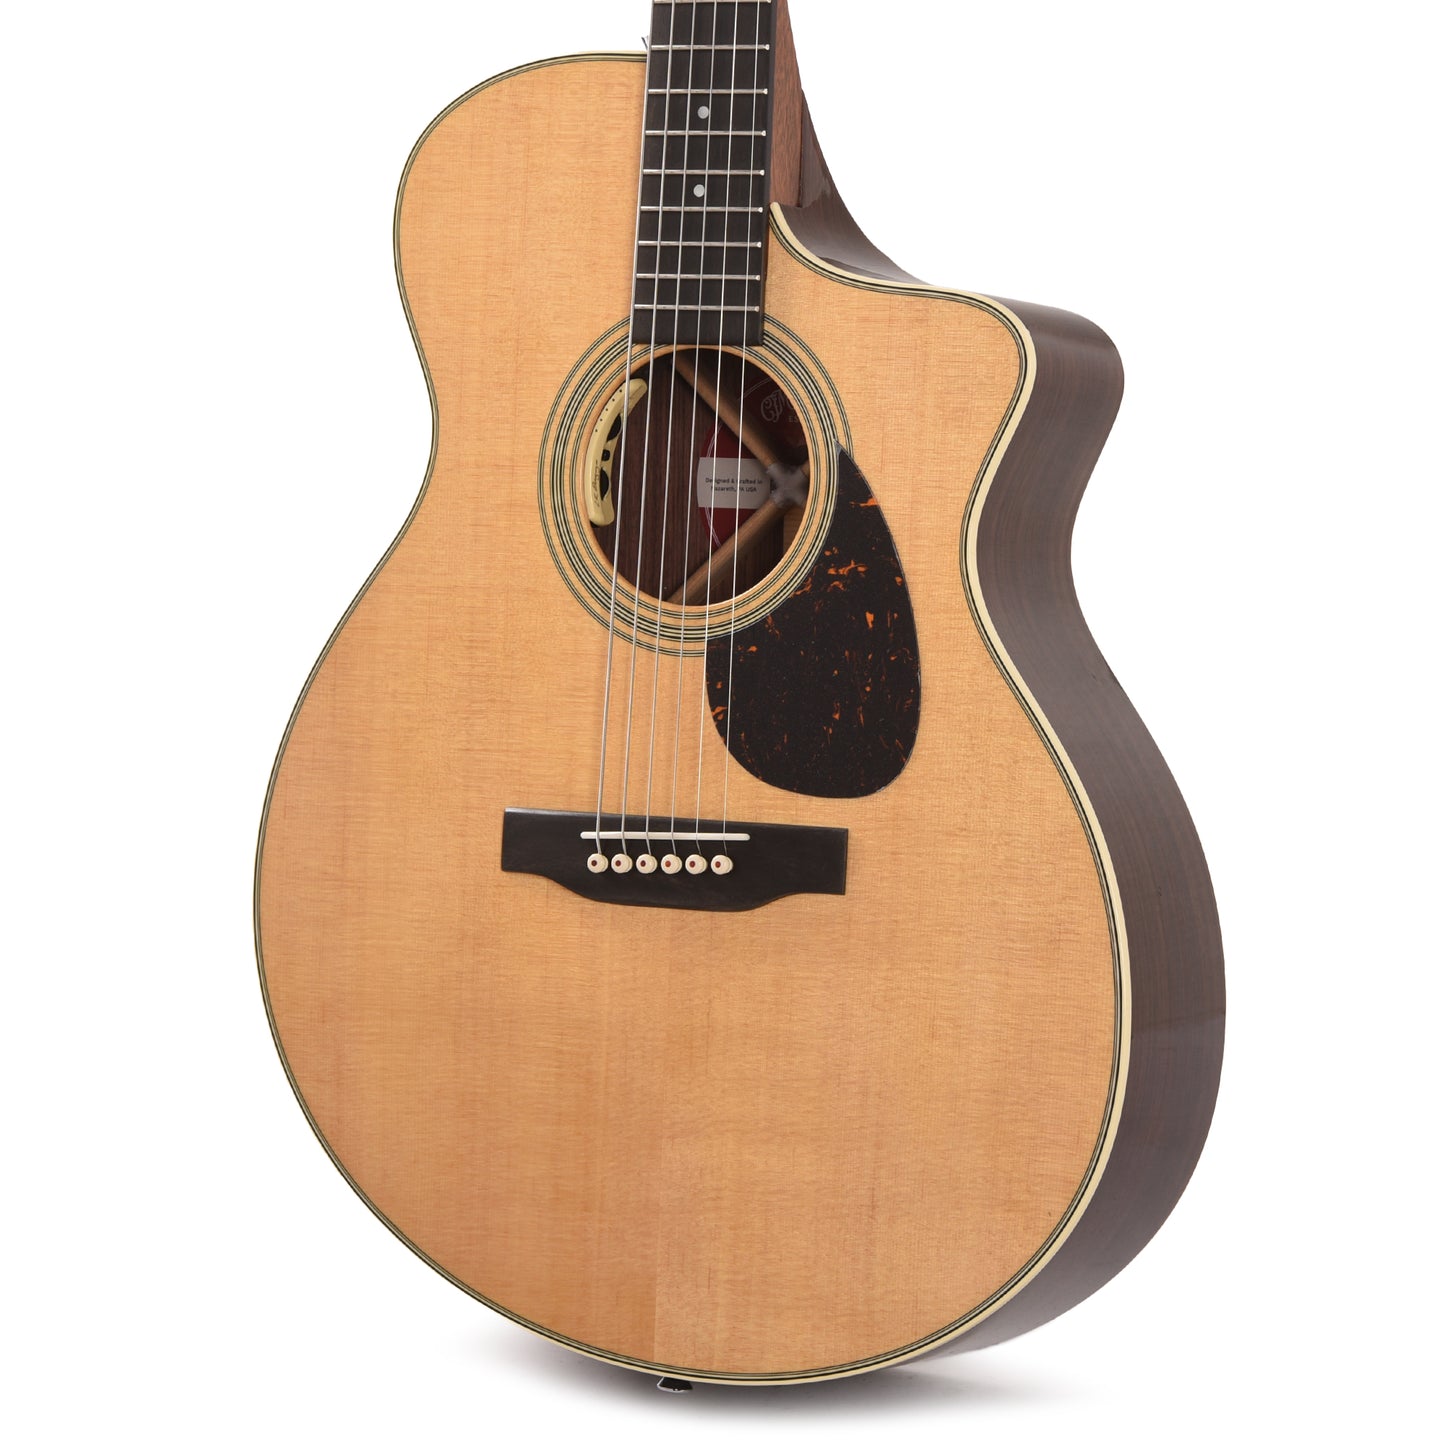 Martin Standard Series SC-28ELRB Spruce/East Indian Rosewood Natural w/LR Baggs